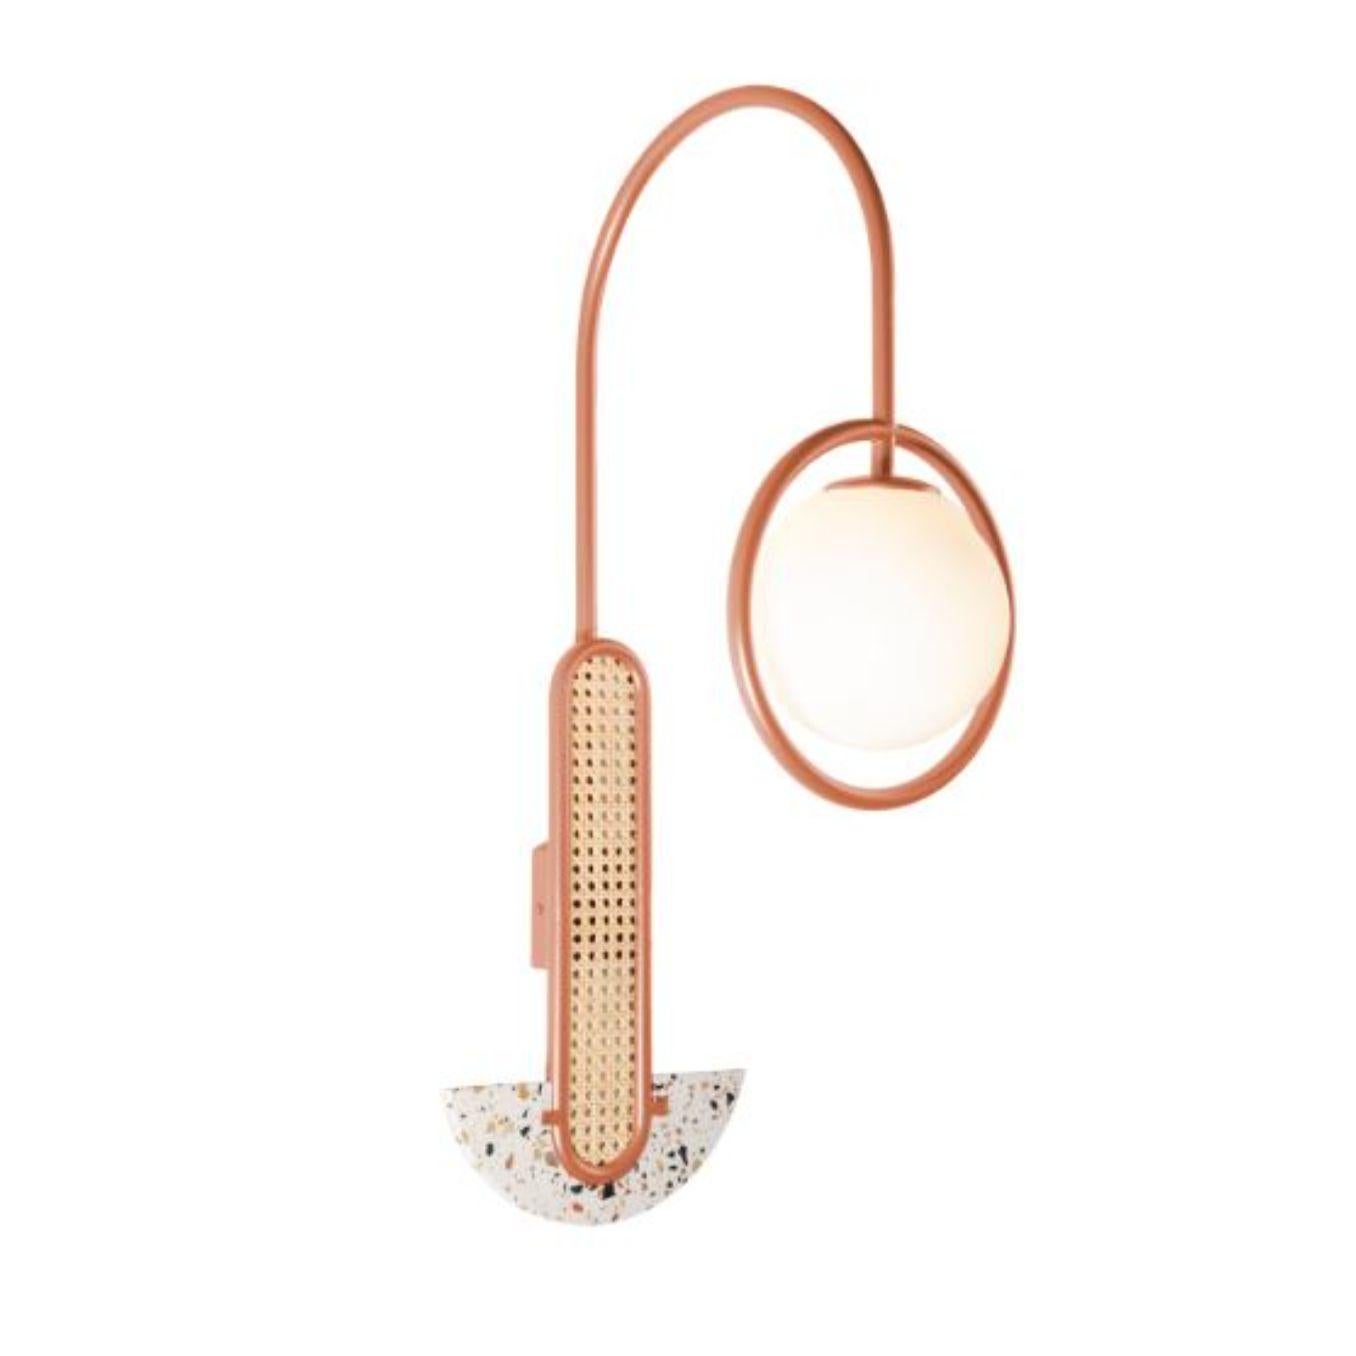 Salmon frame wall lamp by Dooq
Dimensions: W 45 x D 28 x H 85.5 cm
Materials: lacquered metal, rattan, terrazzo.
Also available in different colors. 

Information:
230V/50Hz
1 x max. G9
4W LED

120V/60Hz
1 x max. G9
4W LED

All our